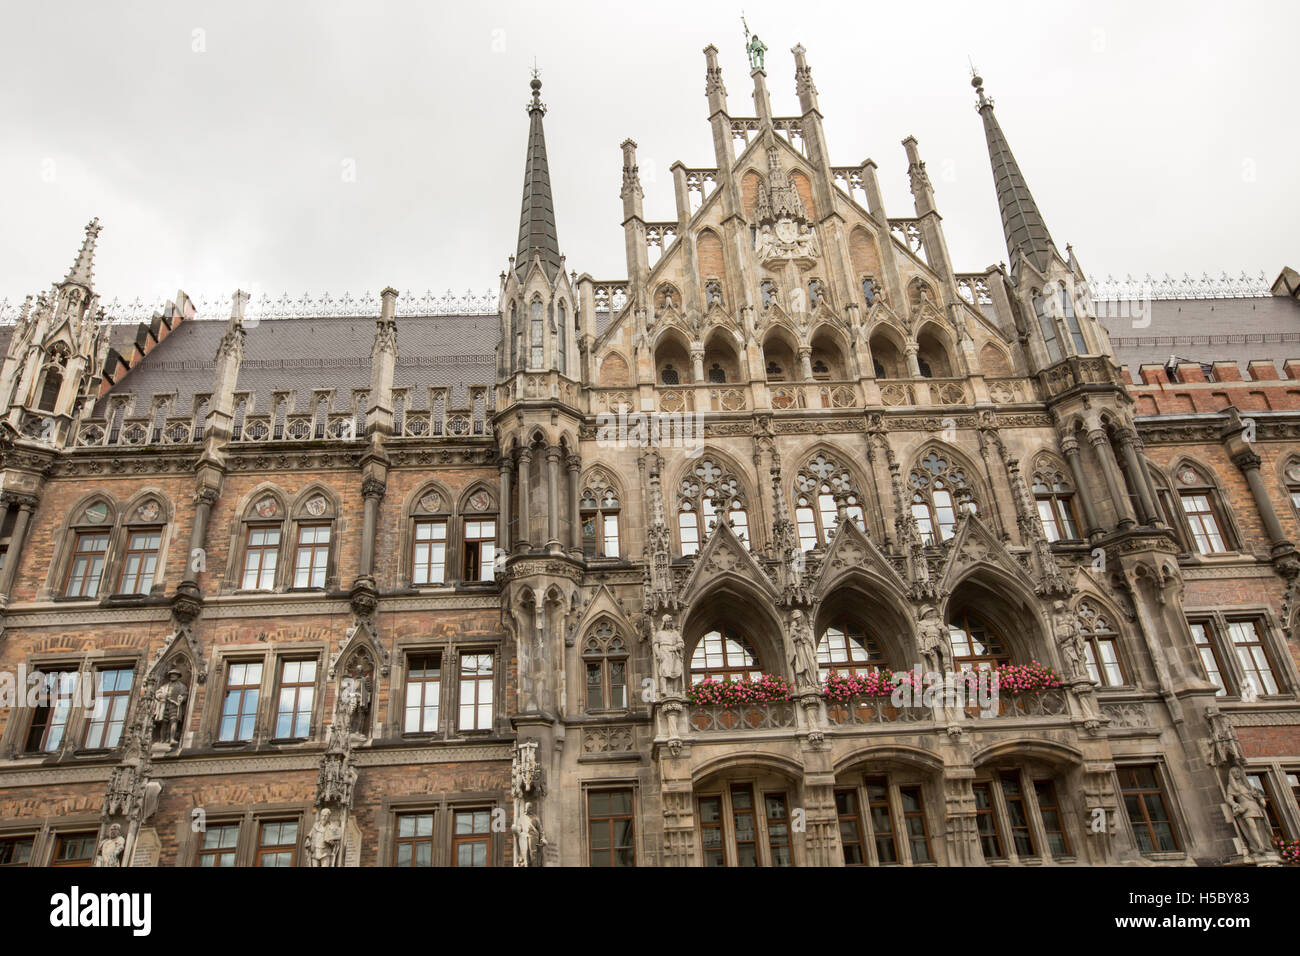 architecture of City Hall in Munich. Stock Photo